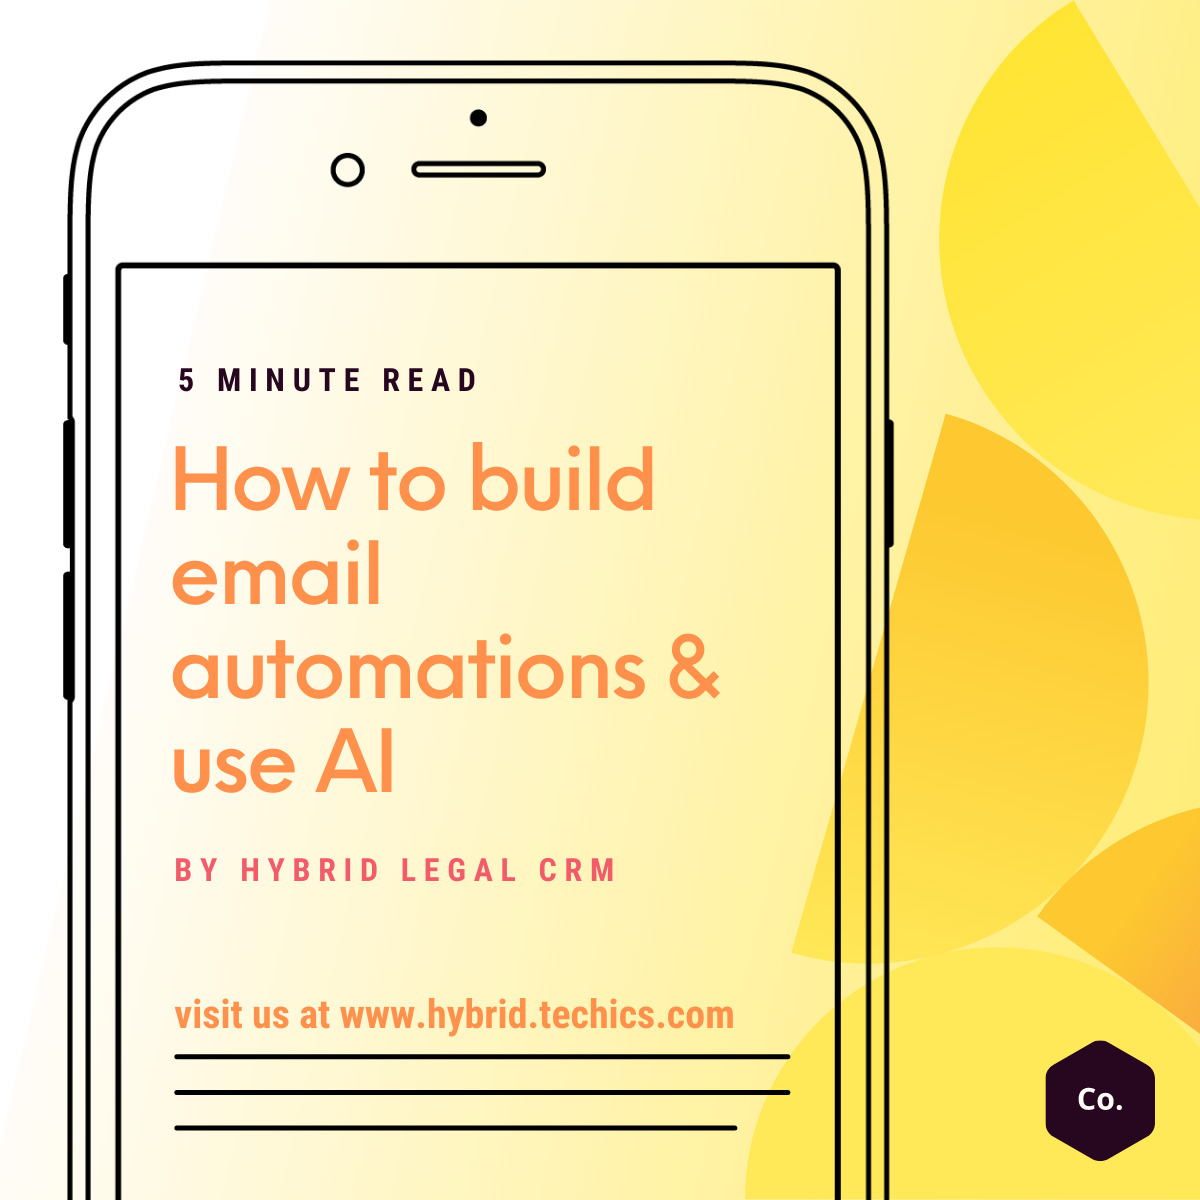 Email automation and machine learning through AI